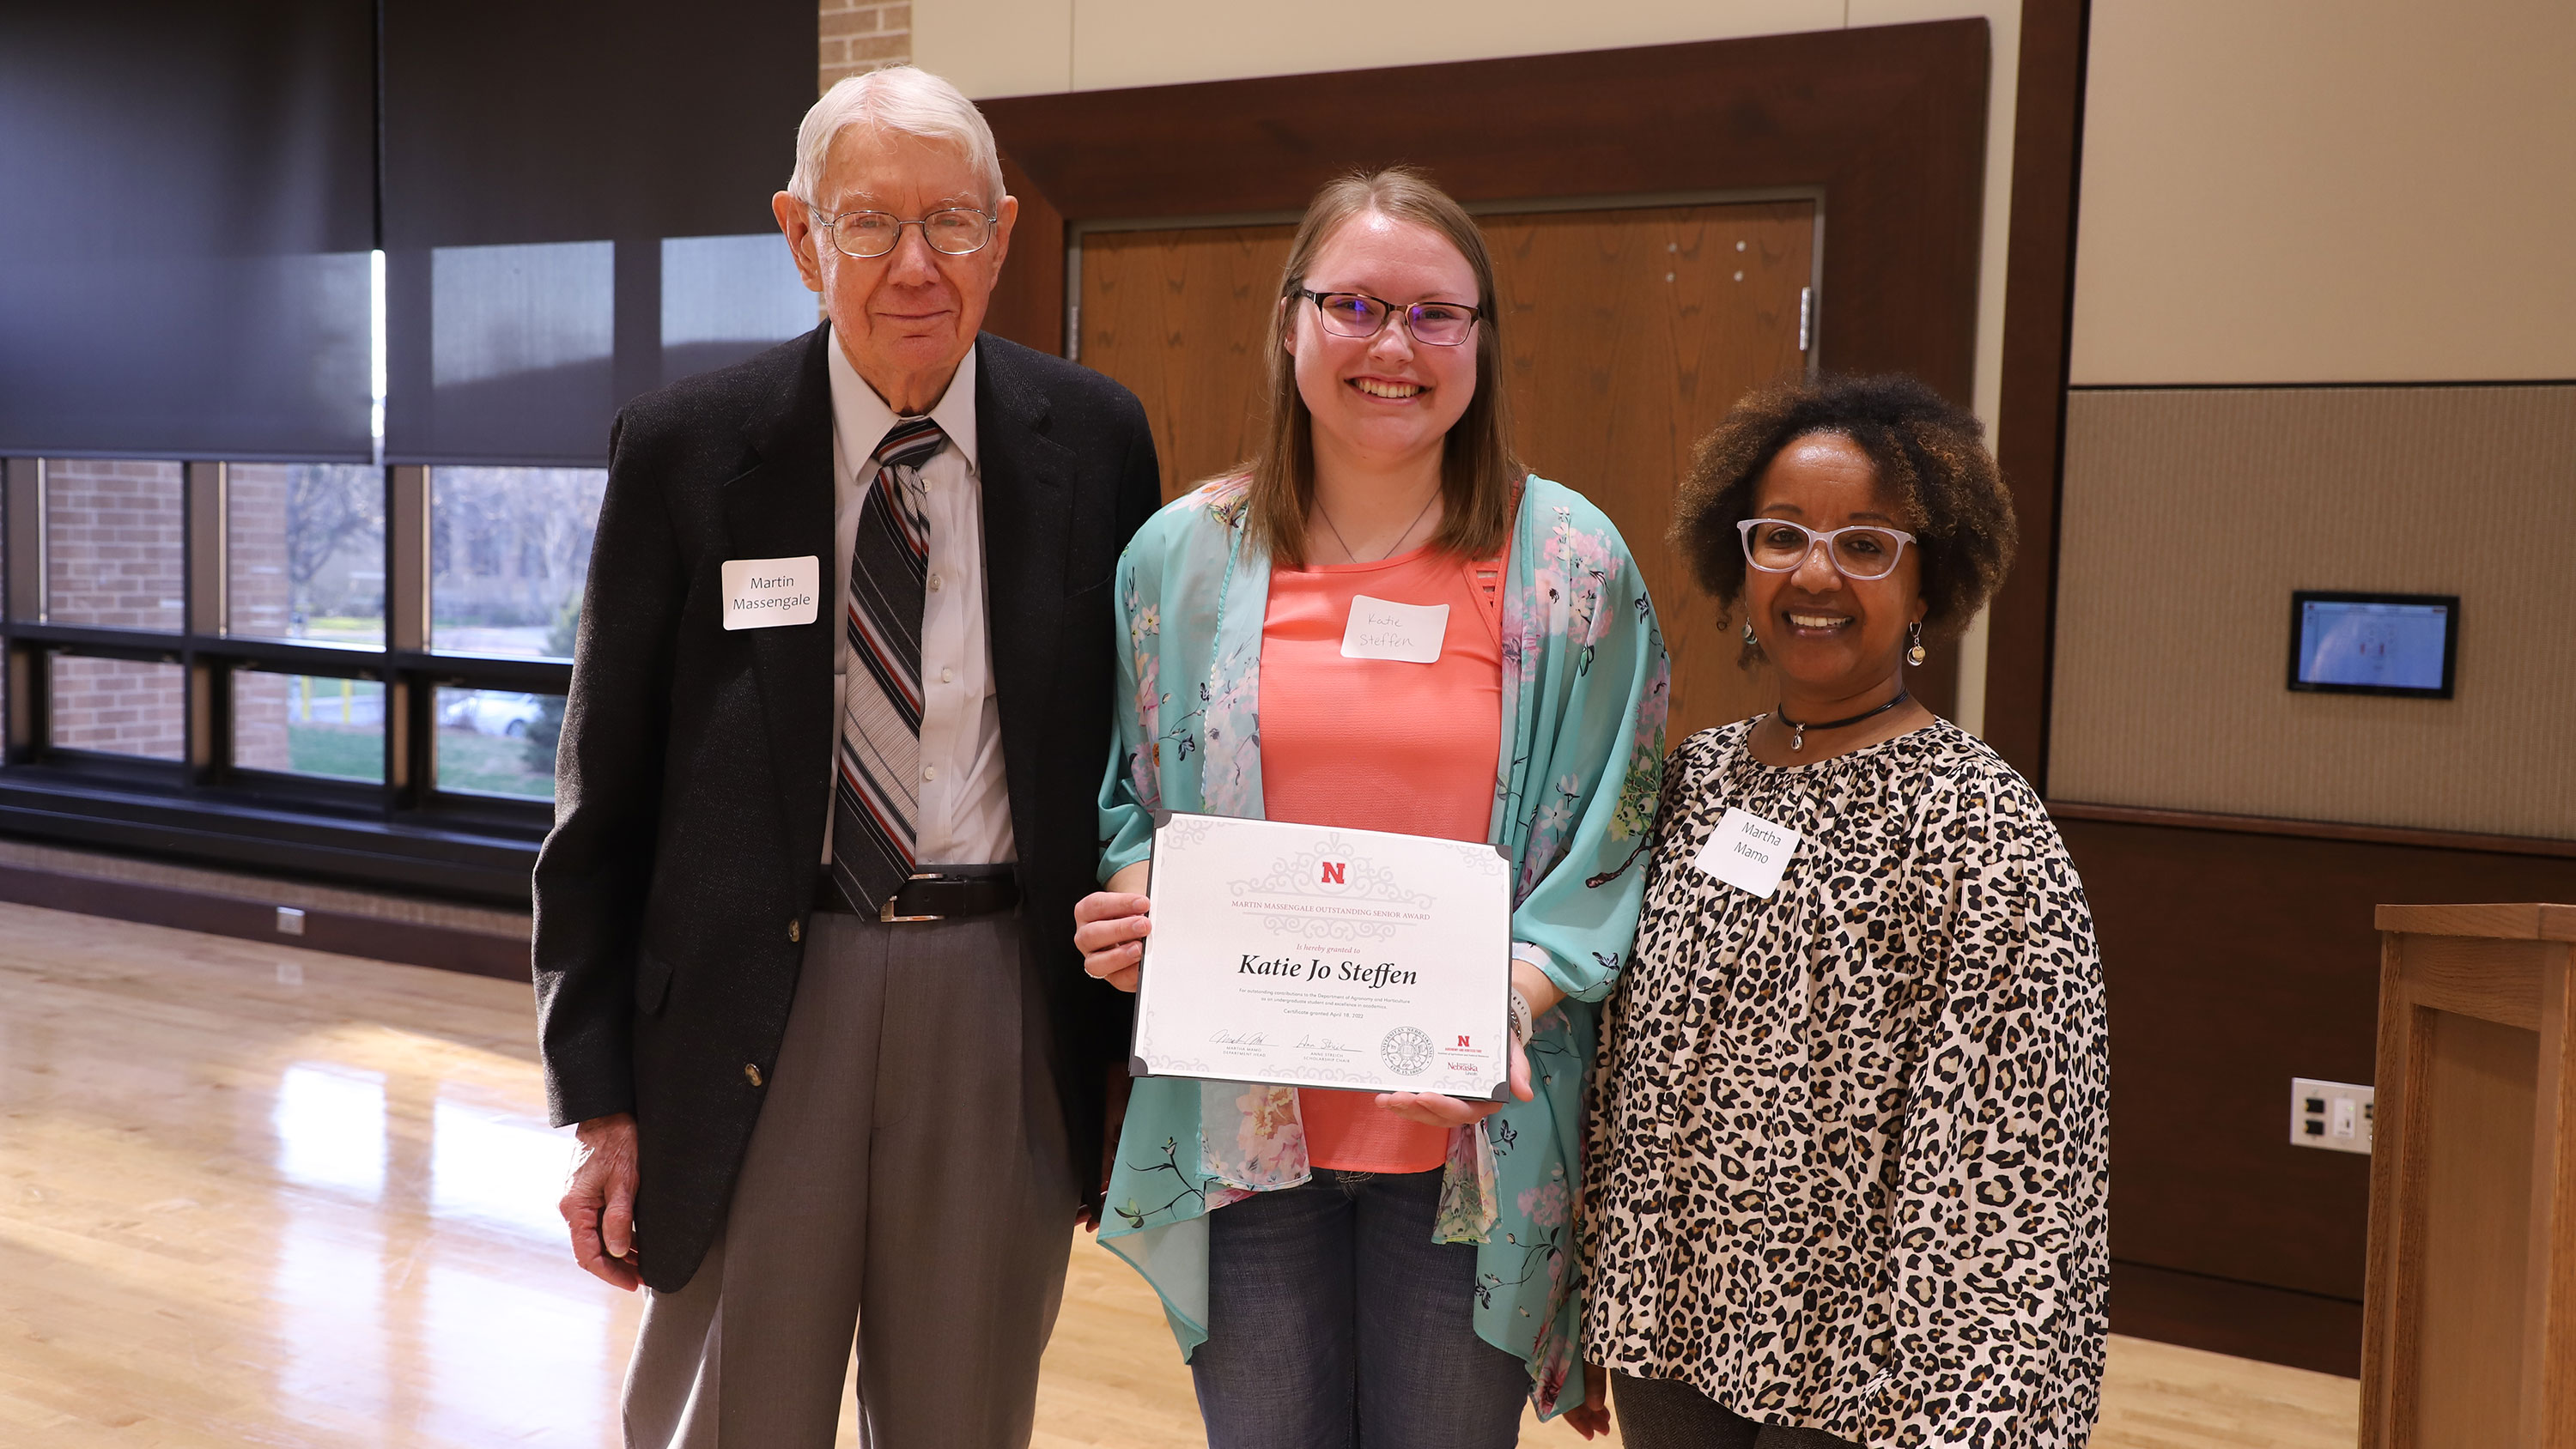 Martin Massengale (left) and Martha Mamo (right) present Katie Jo Steffen with the Martin Massengale Outstanding Senior Award at the Agronomy and Horticulture Spring Banquet April 18.